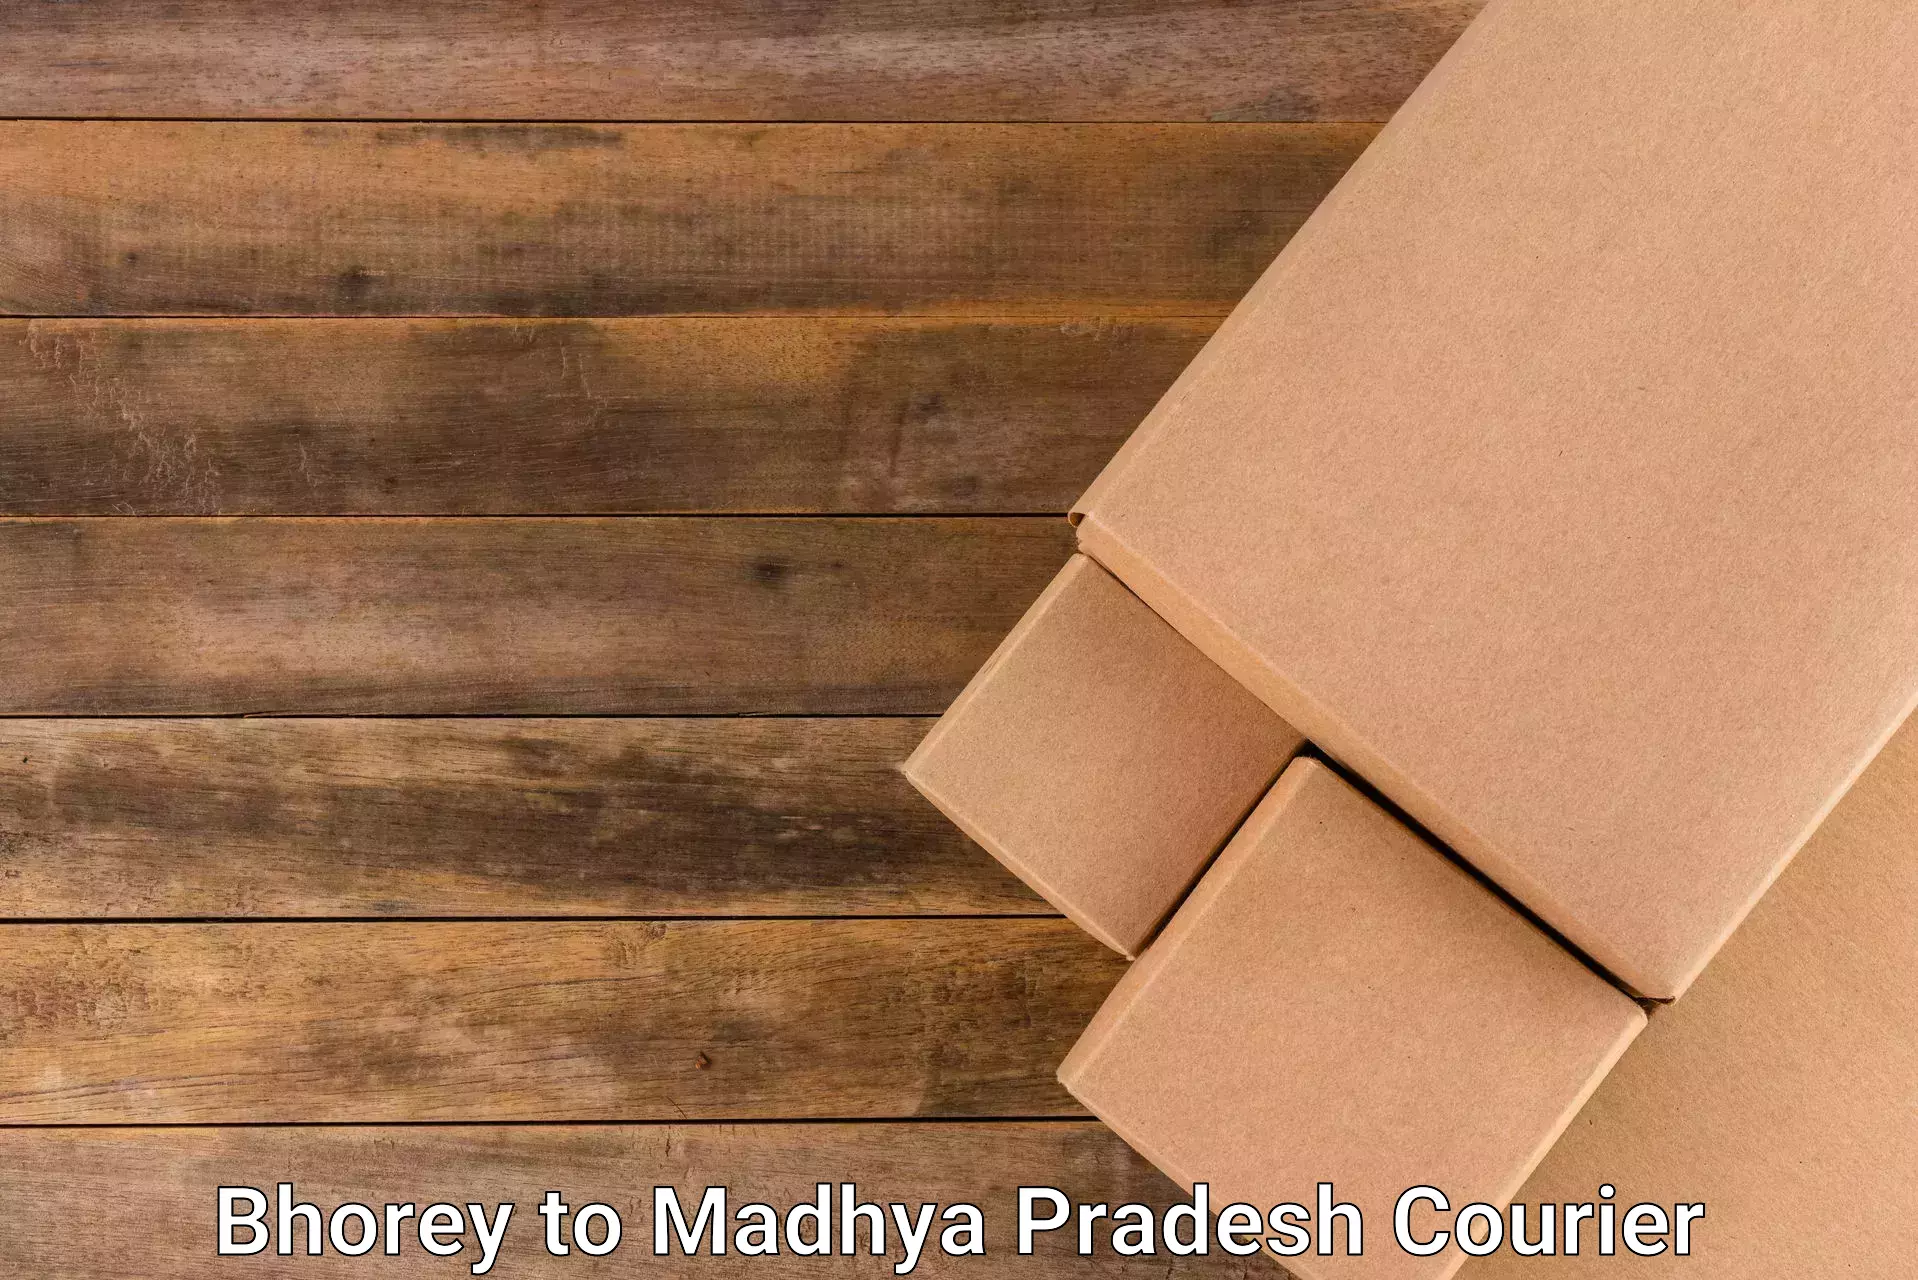 Tech-enabled shipping in Bhorey to Madwas